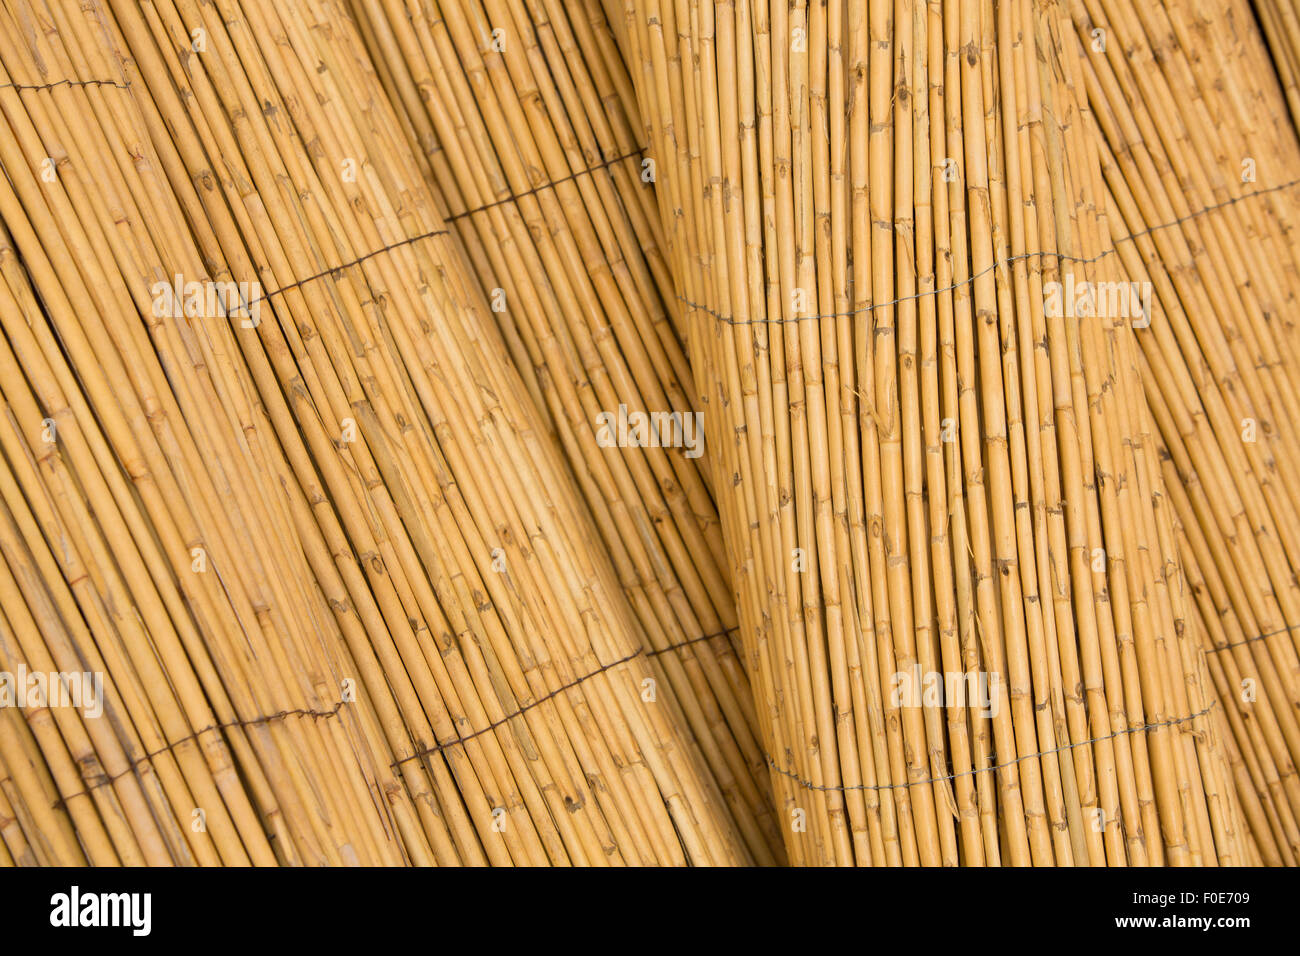 Background Texture of A Bamboo Fence found in store in Marrakesh, Morocco Stock Photo